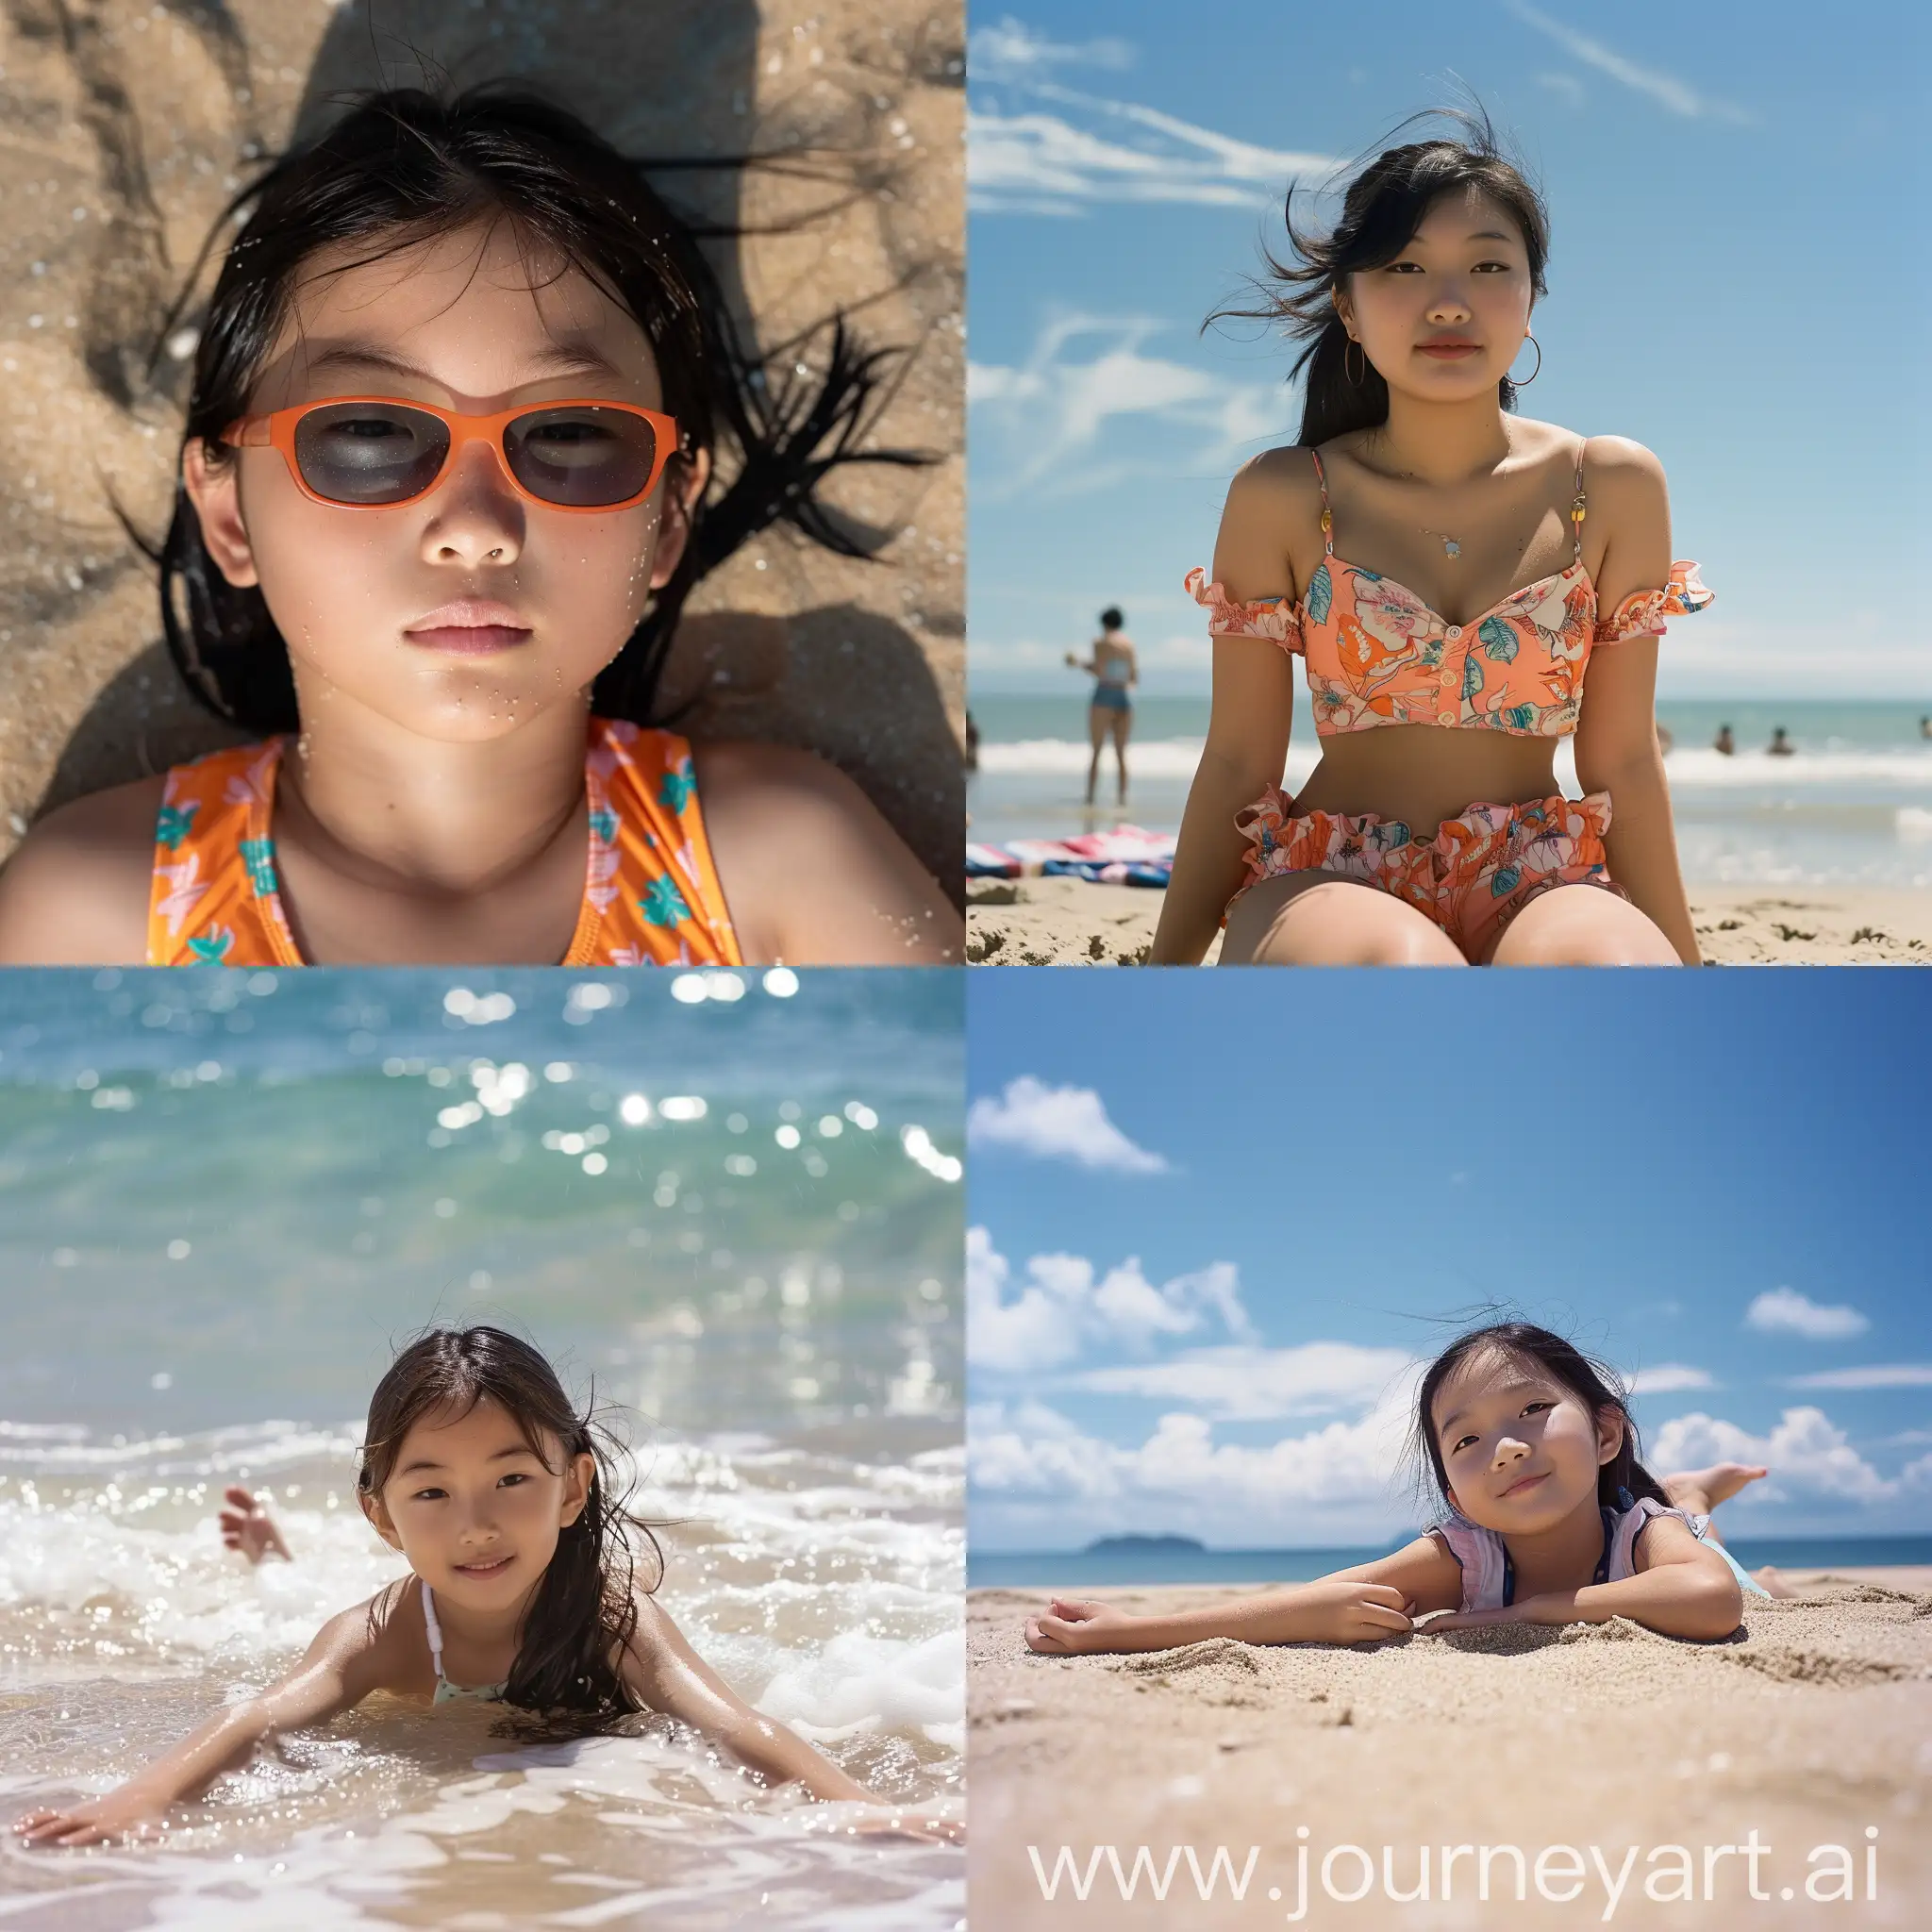 Sunny-Day-Serenity-Young-Asian-Girl-Enjoying-Beach-Relaxation